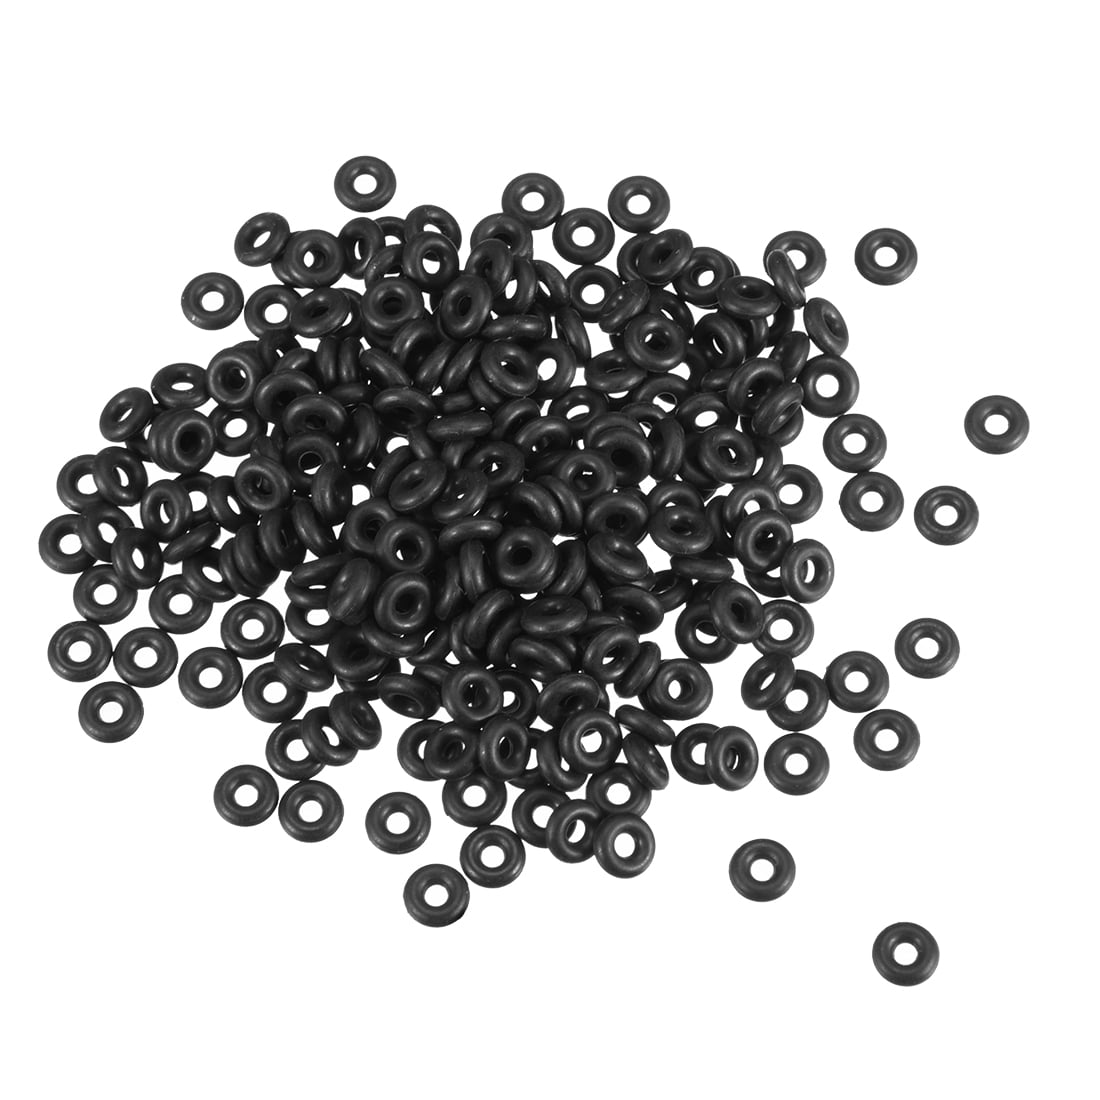 3mm Section 105mm Bore NITRILE 70 Rubber O-Rings 